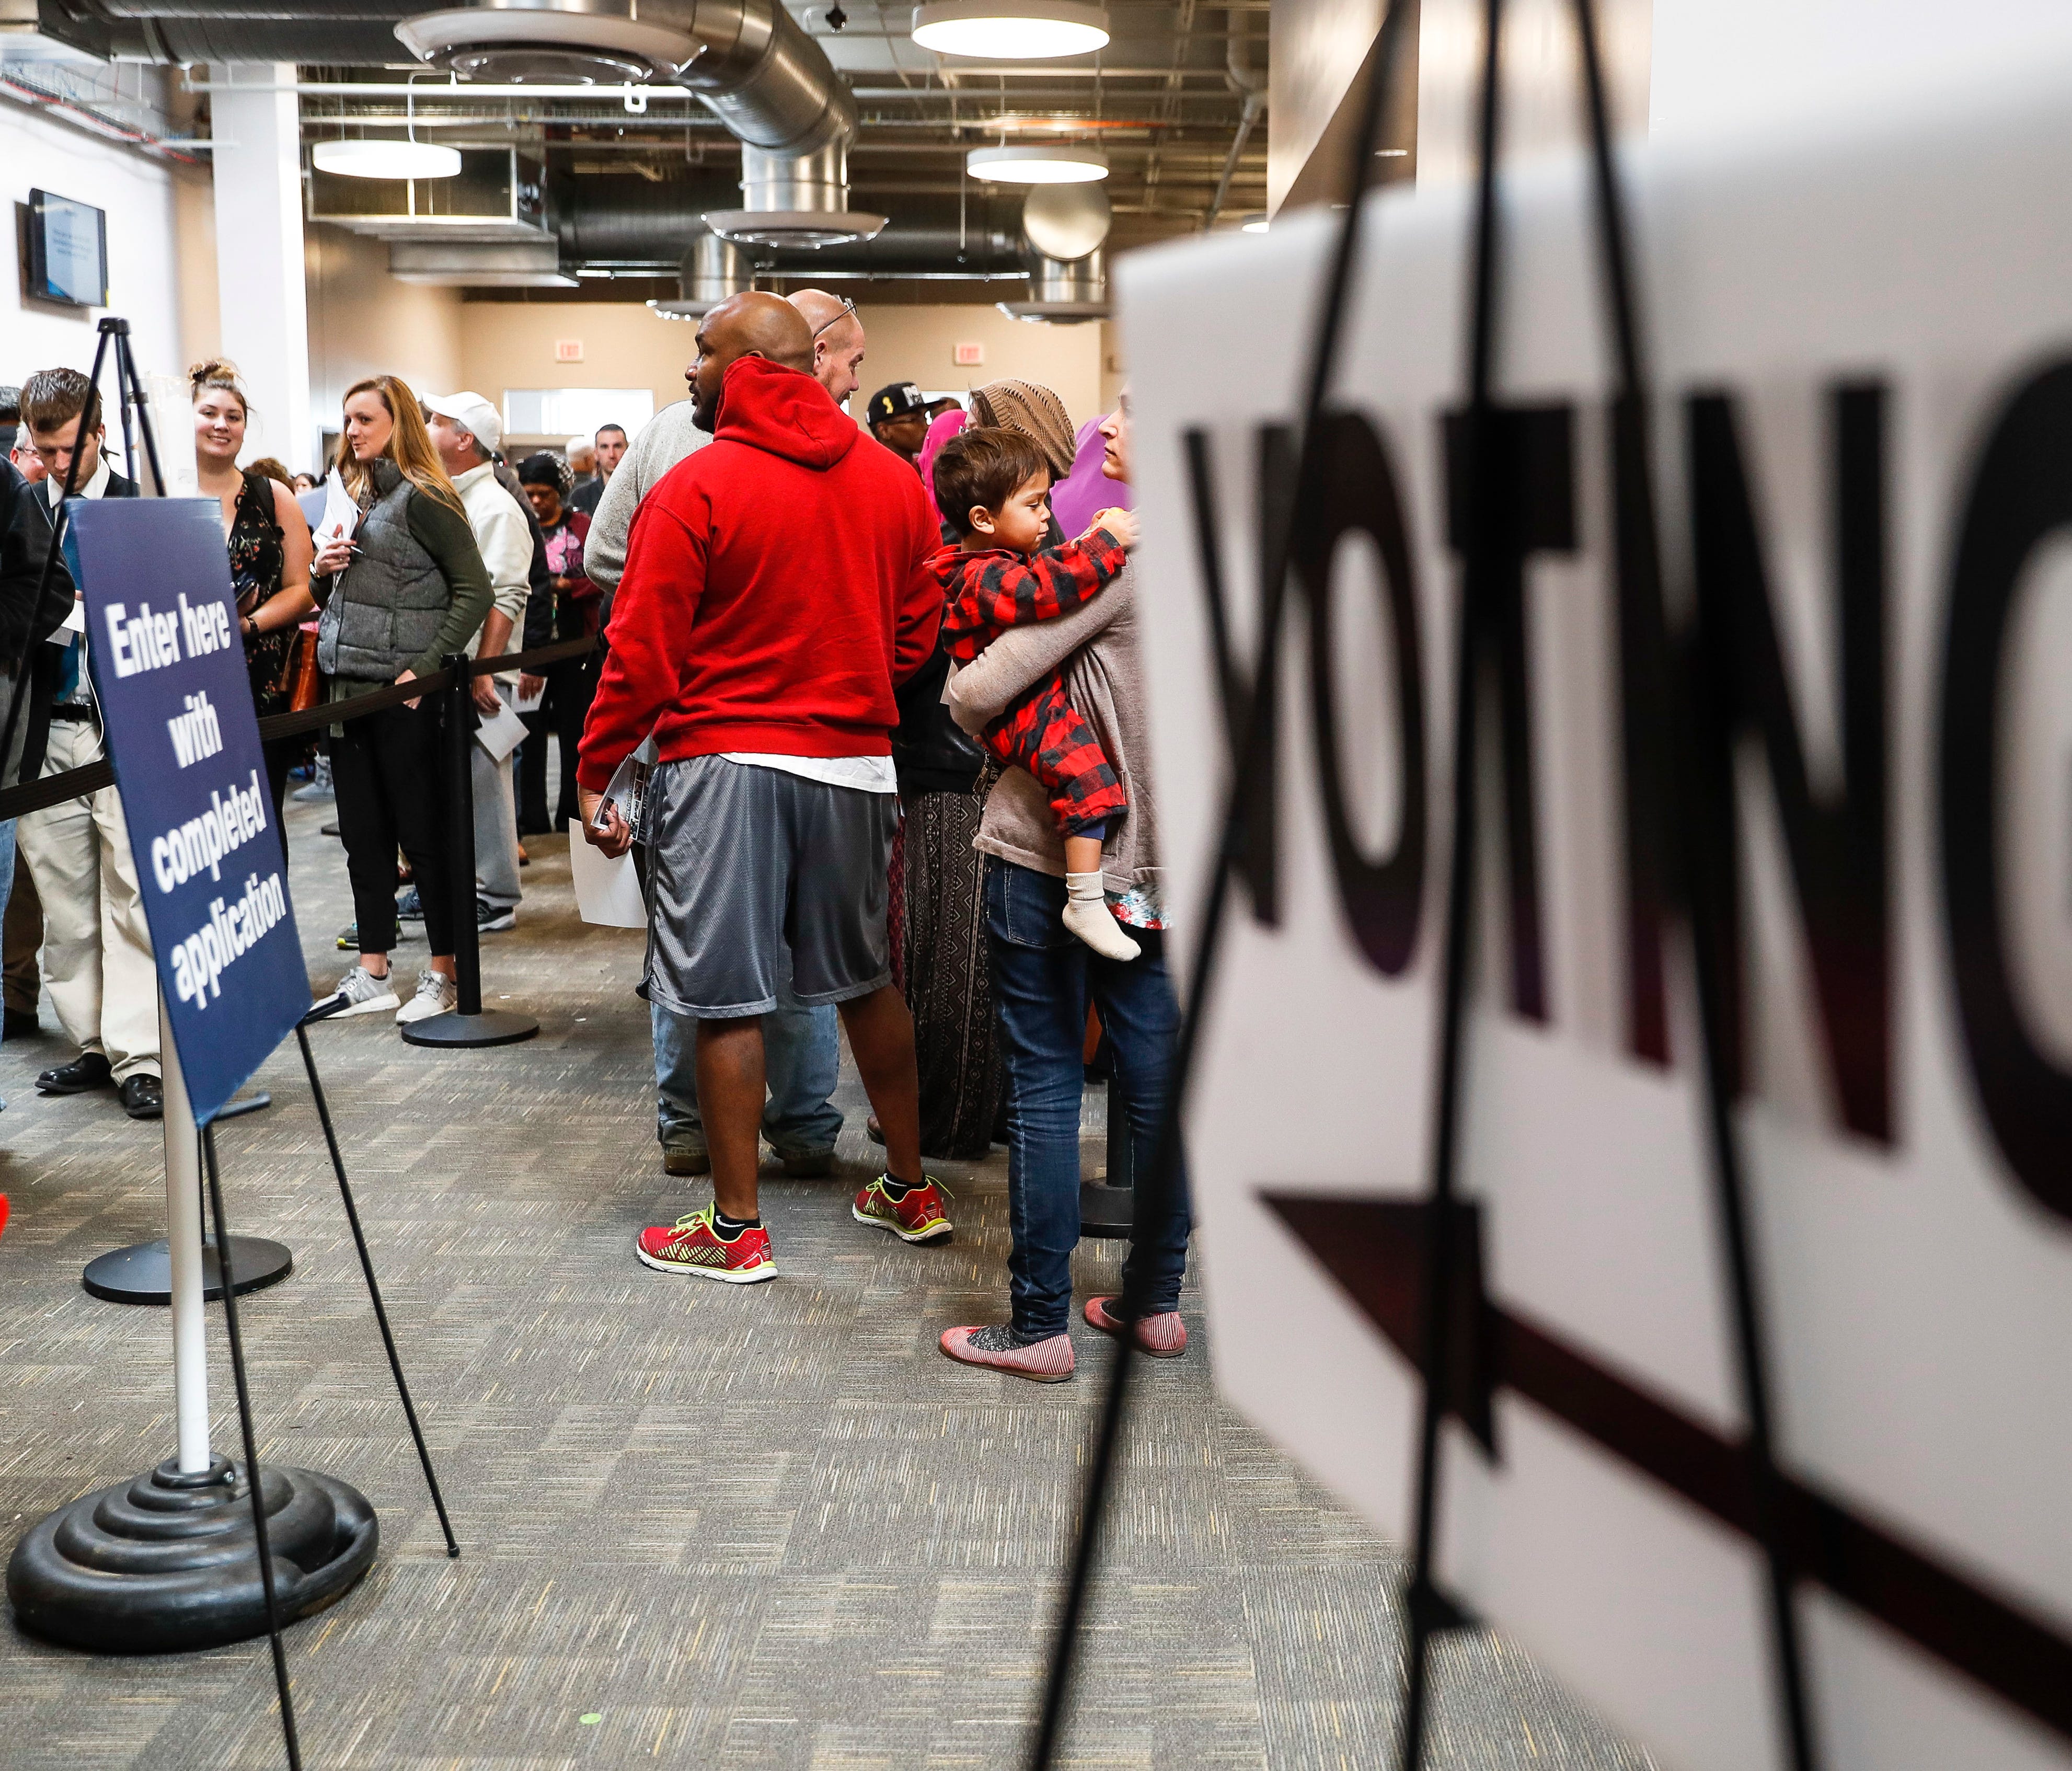 Early voters wait at the Franklin County Board of Elections on Nov. 7, 2016, in Columbus, Ohio.